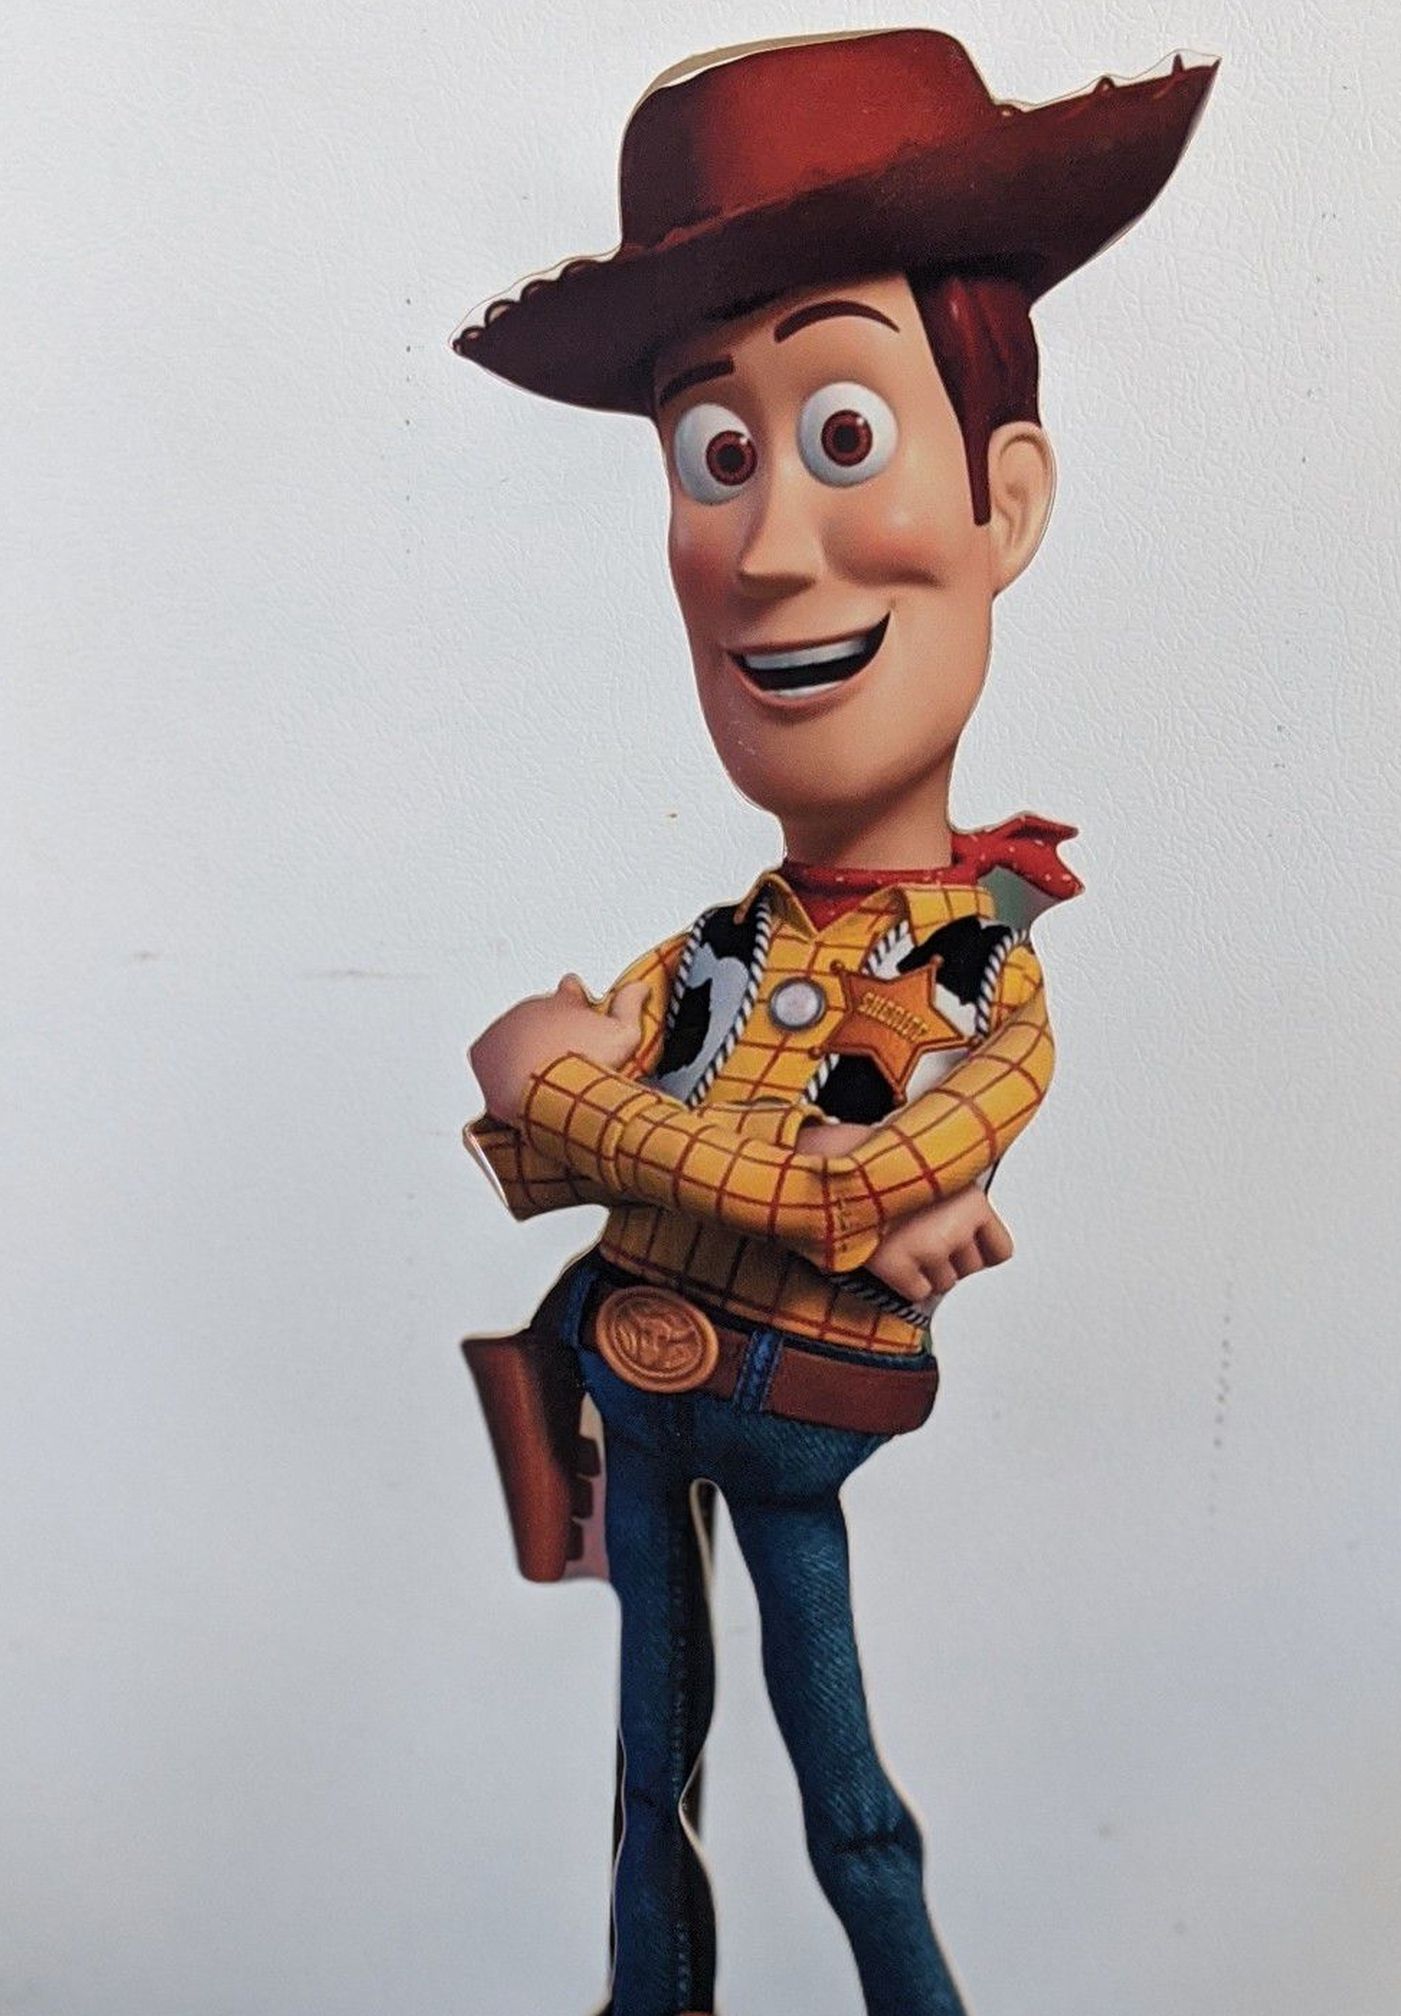 Woody Party Decorations/Centerpieces